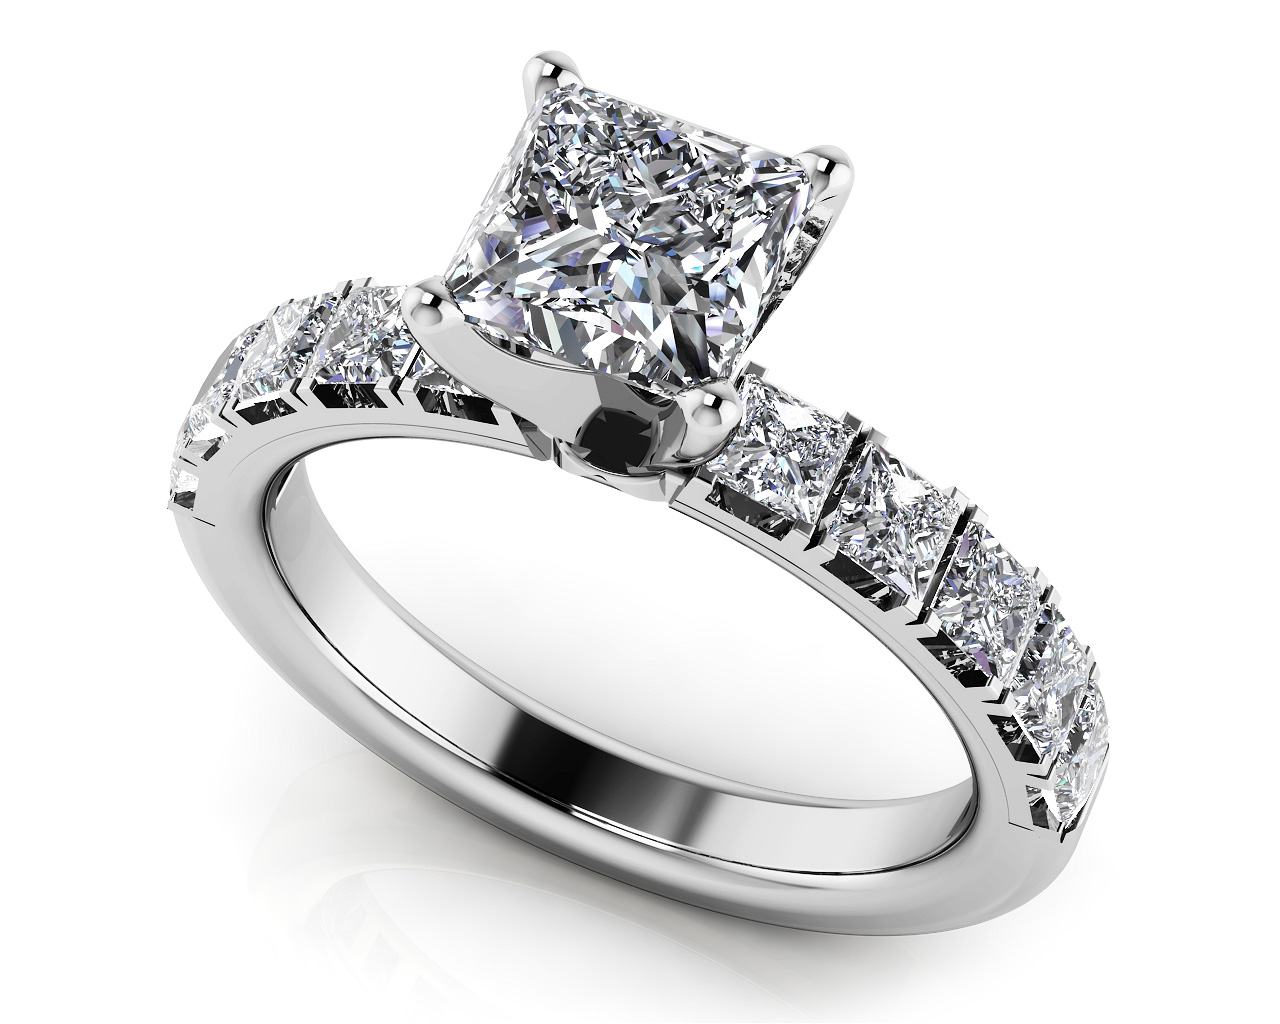 Princess Allure Engagement Ring - Roco's Jewelry - Bakersfield CA